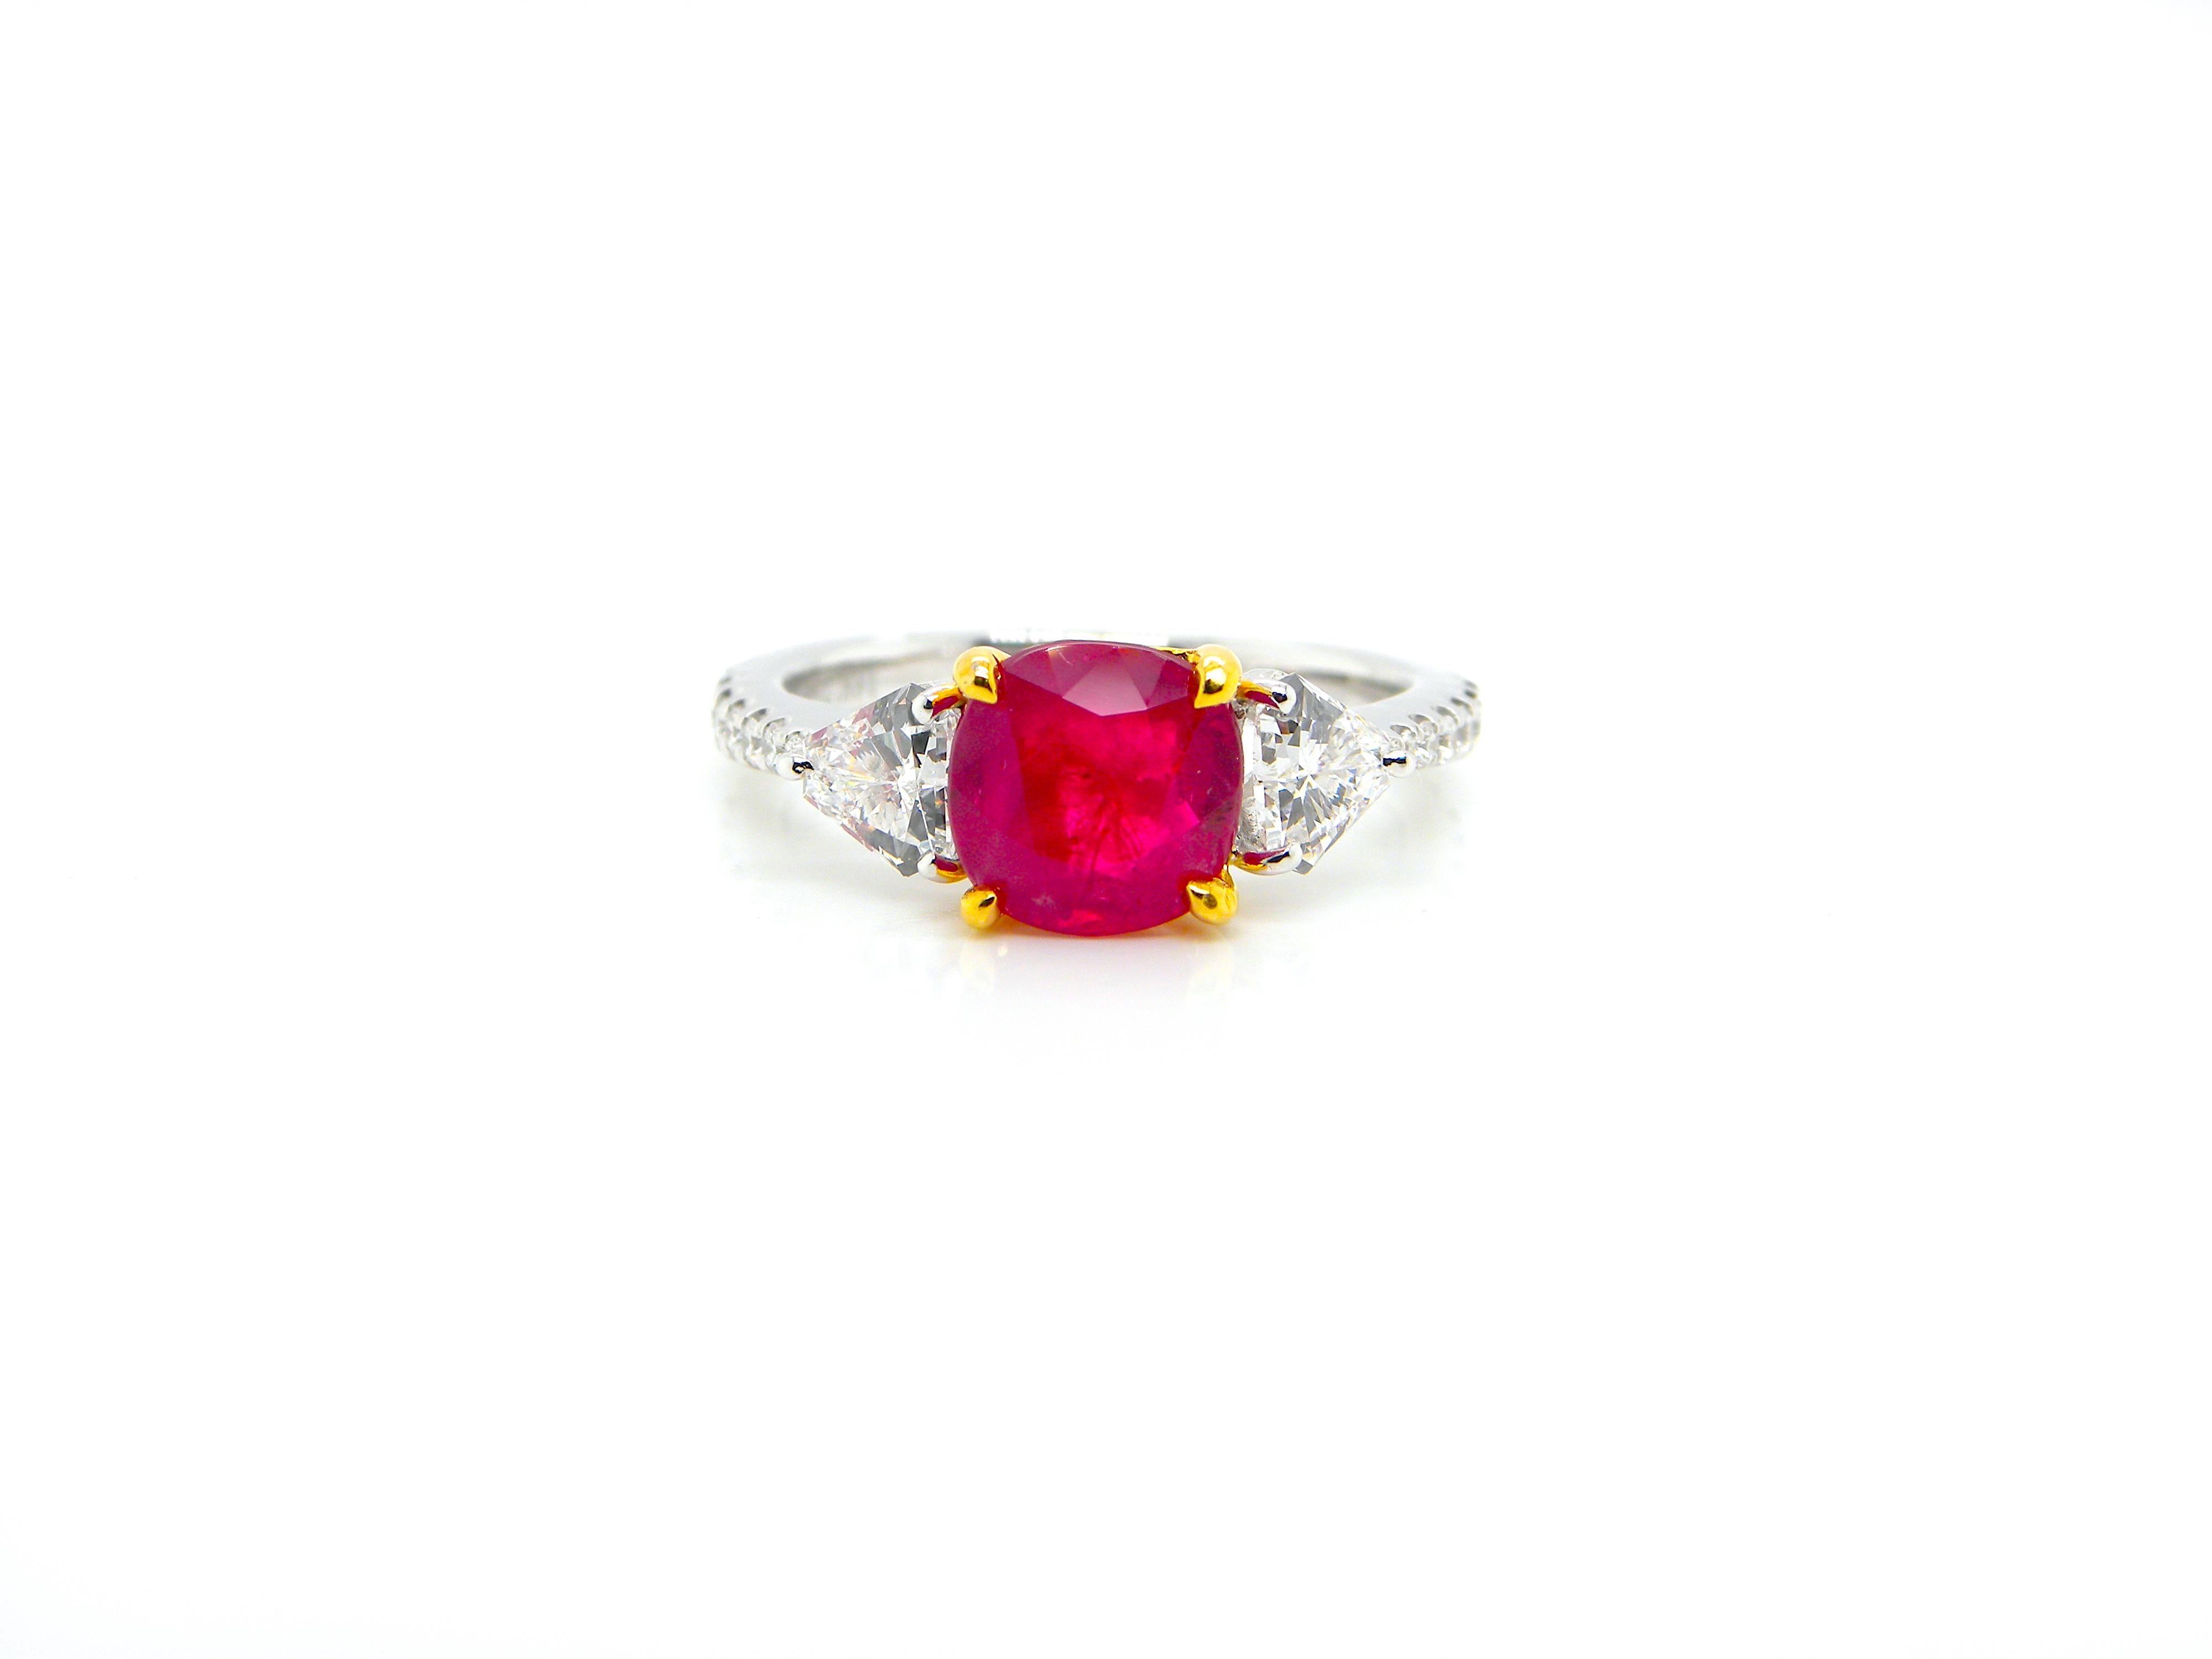 Contemporary 1.93 Carat GIA Certified Burma No Heat Pigeon's Blood Red Ruby and Diamond Ring